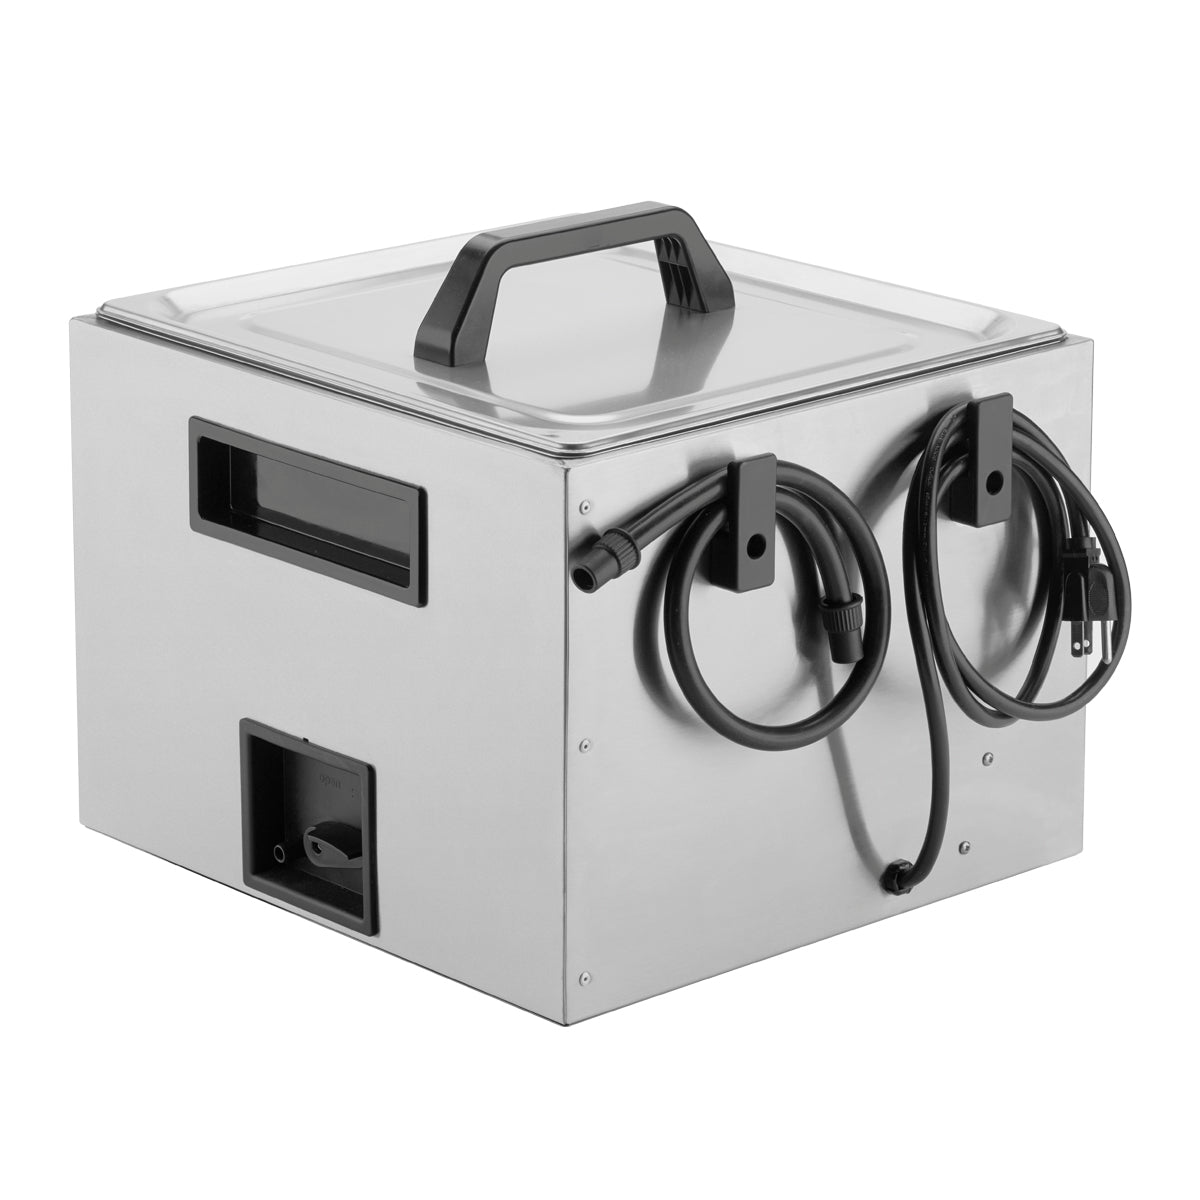 WSV16 Commercial 16-liter Sous Vide Thermal Circulator by Waring Commercial